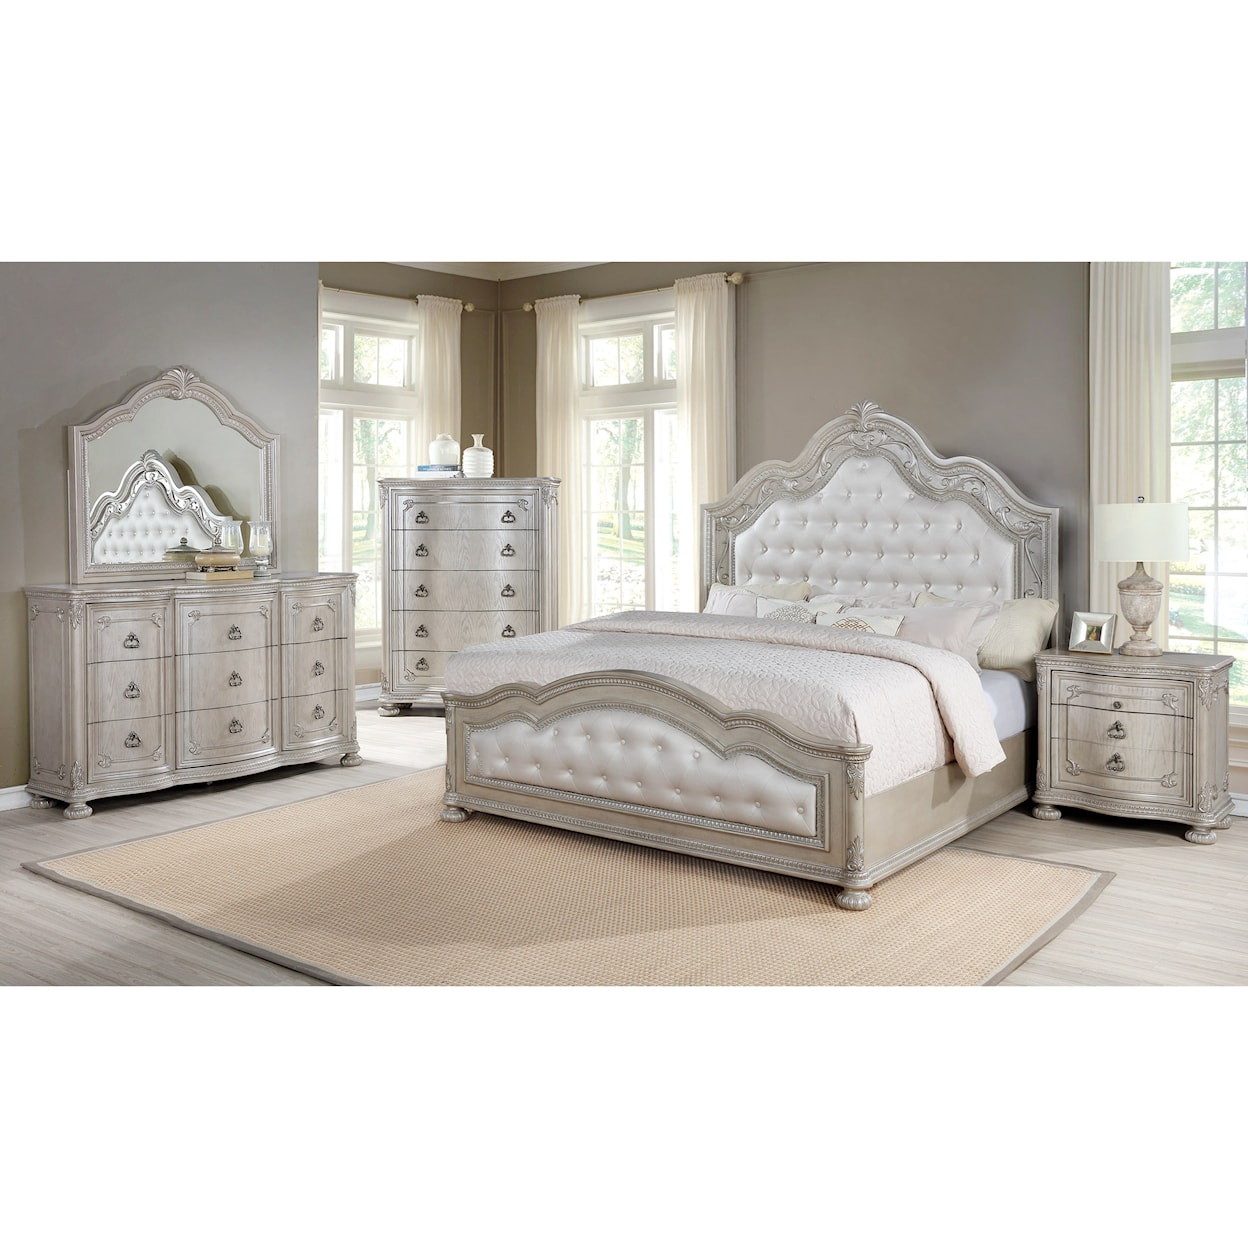 Avalon Furniture Andalusia Queen Bedroom Group